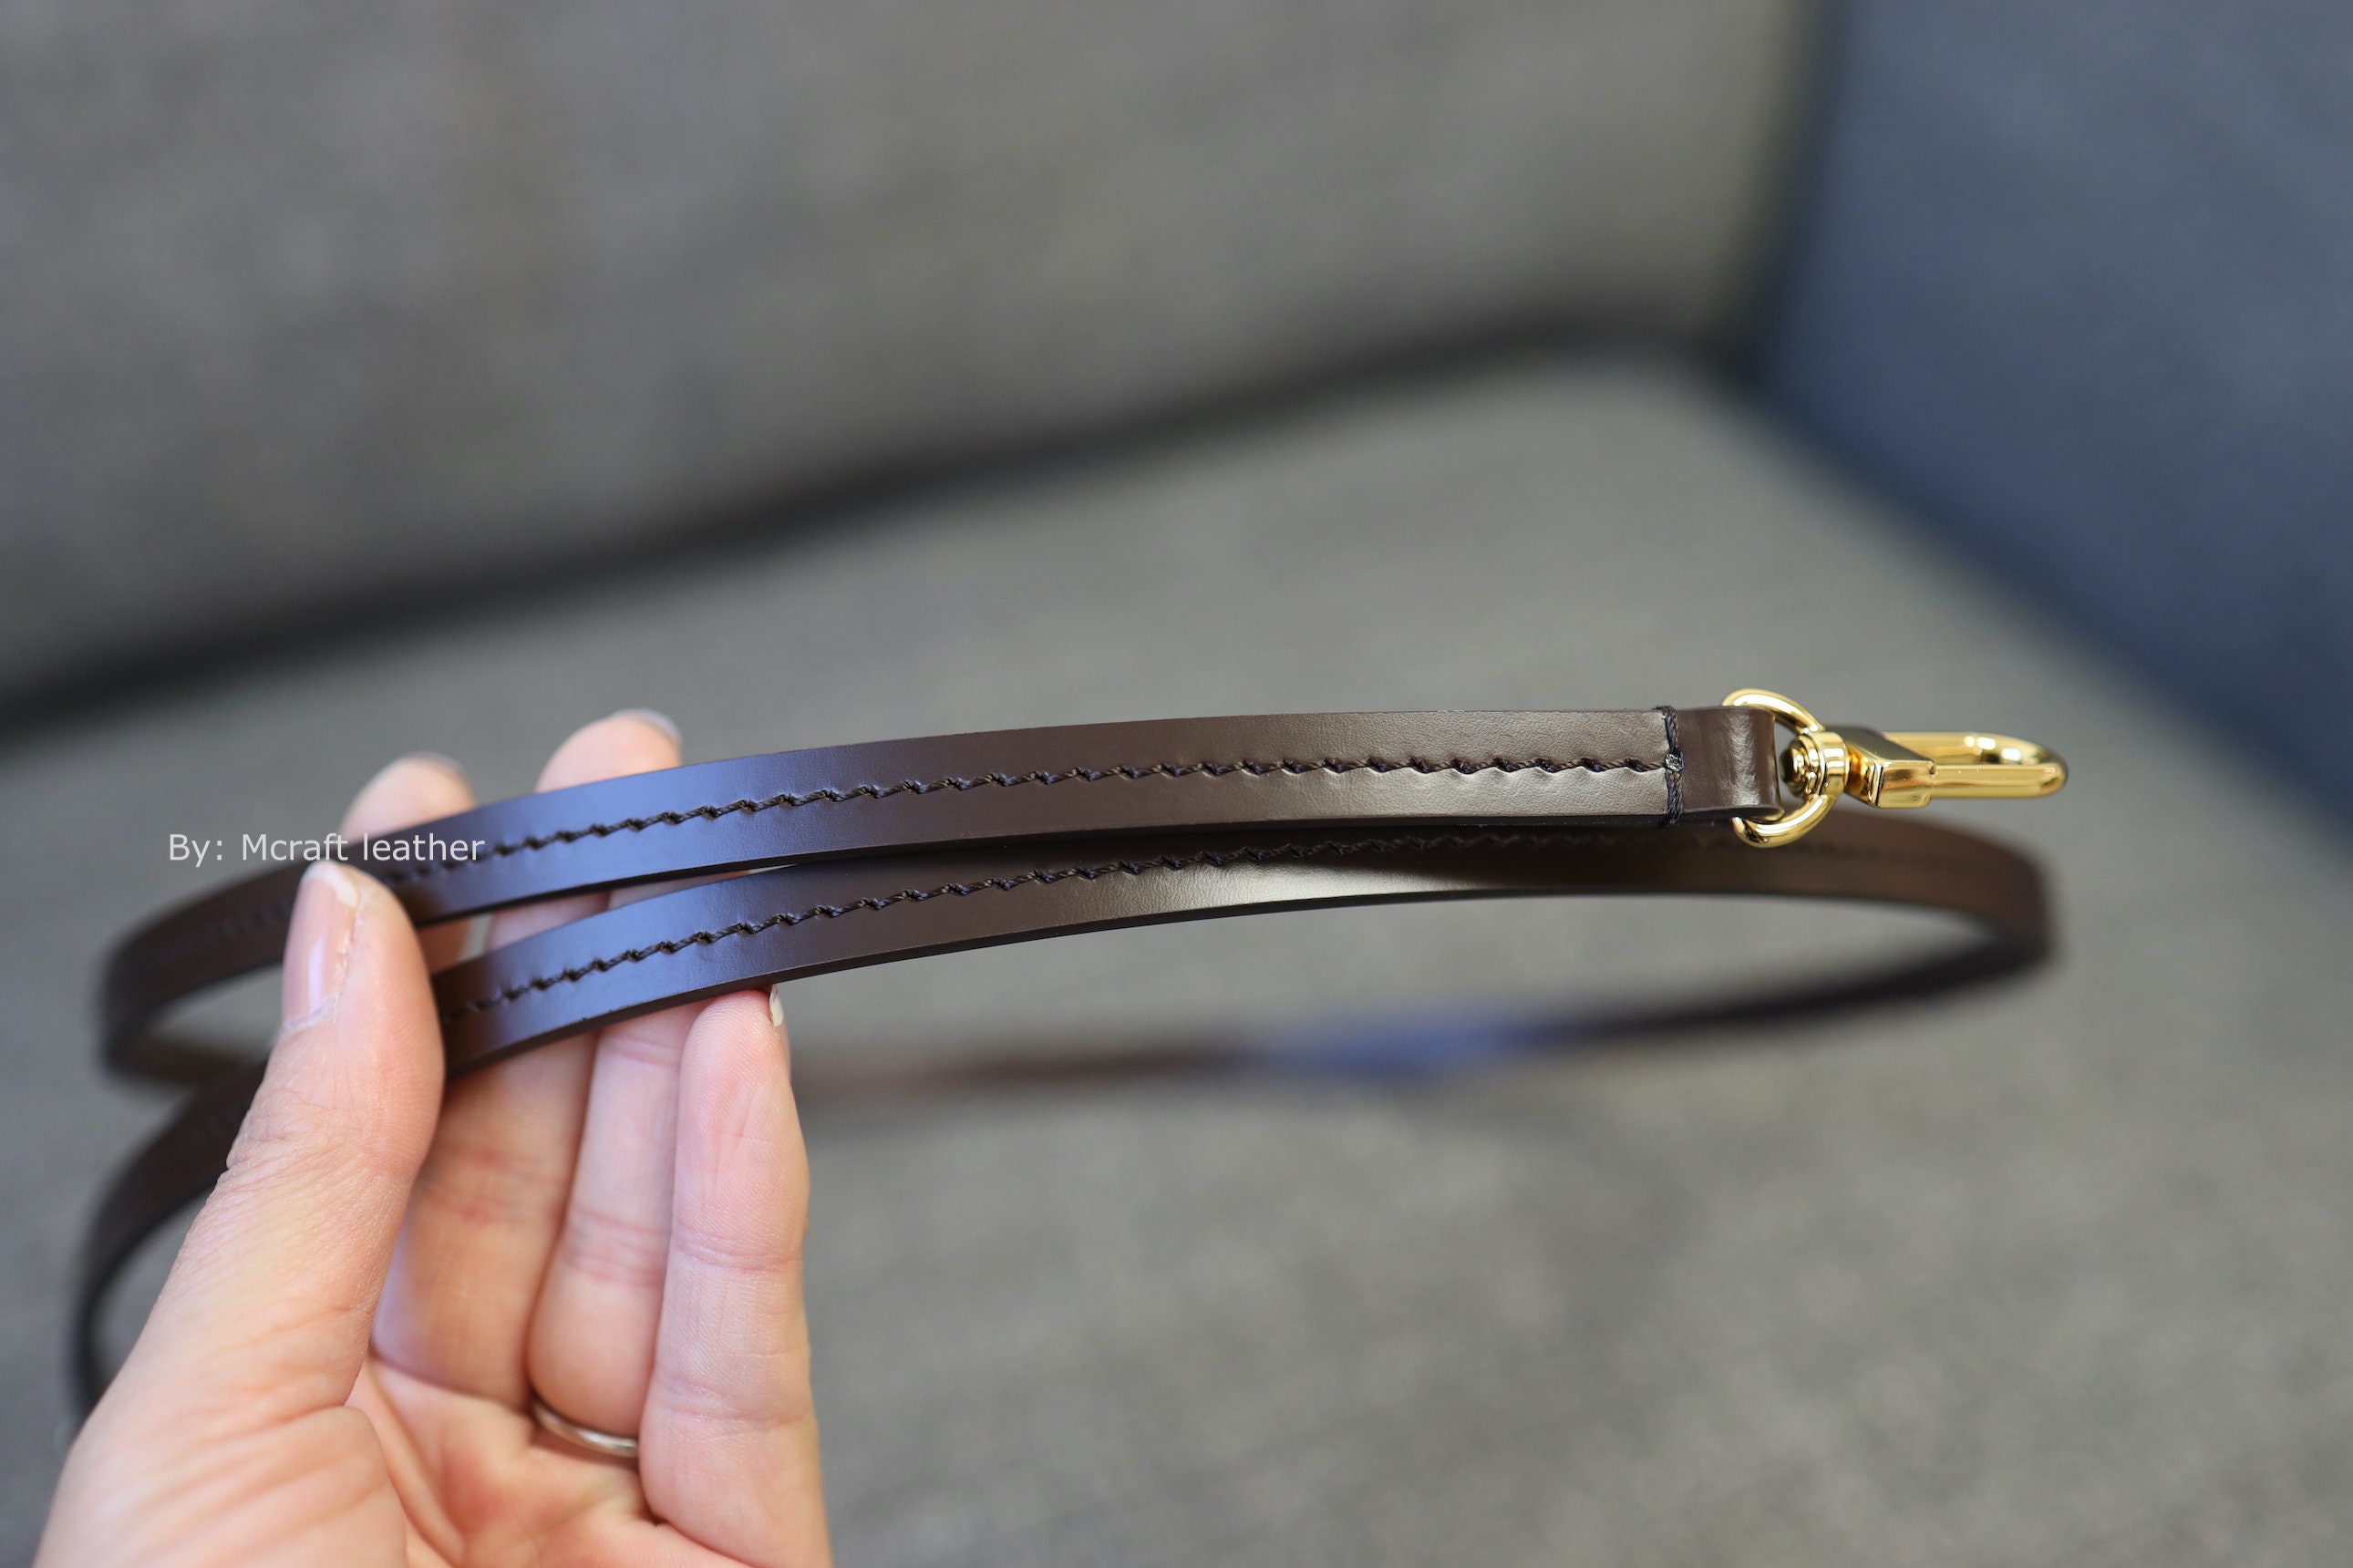 LOUIS VUITTON guitar straps and tassels • CUSTOM MADE • $200 and